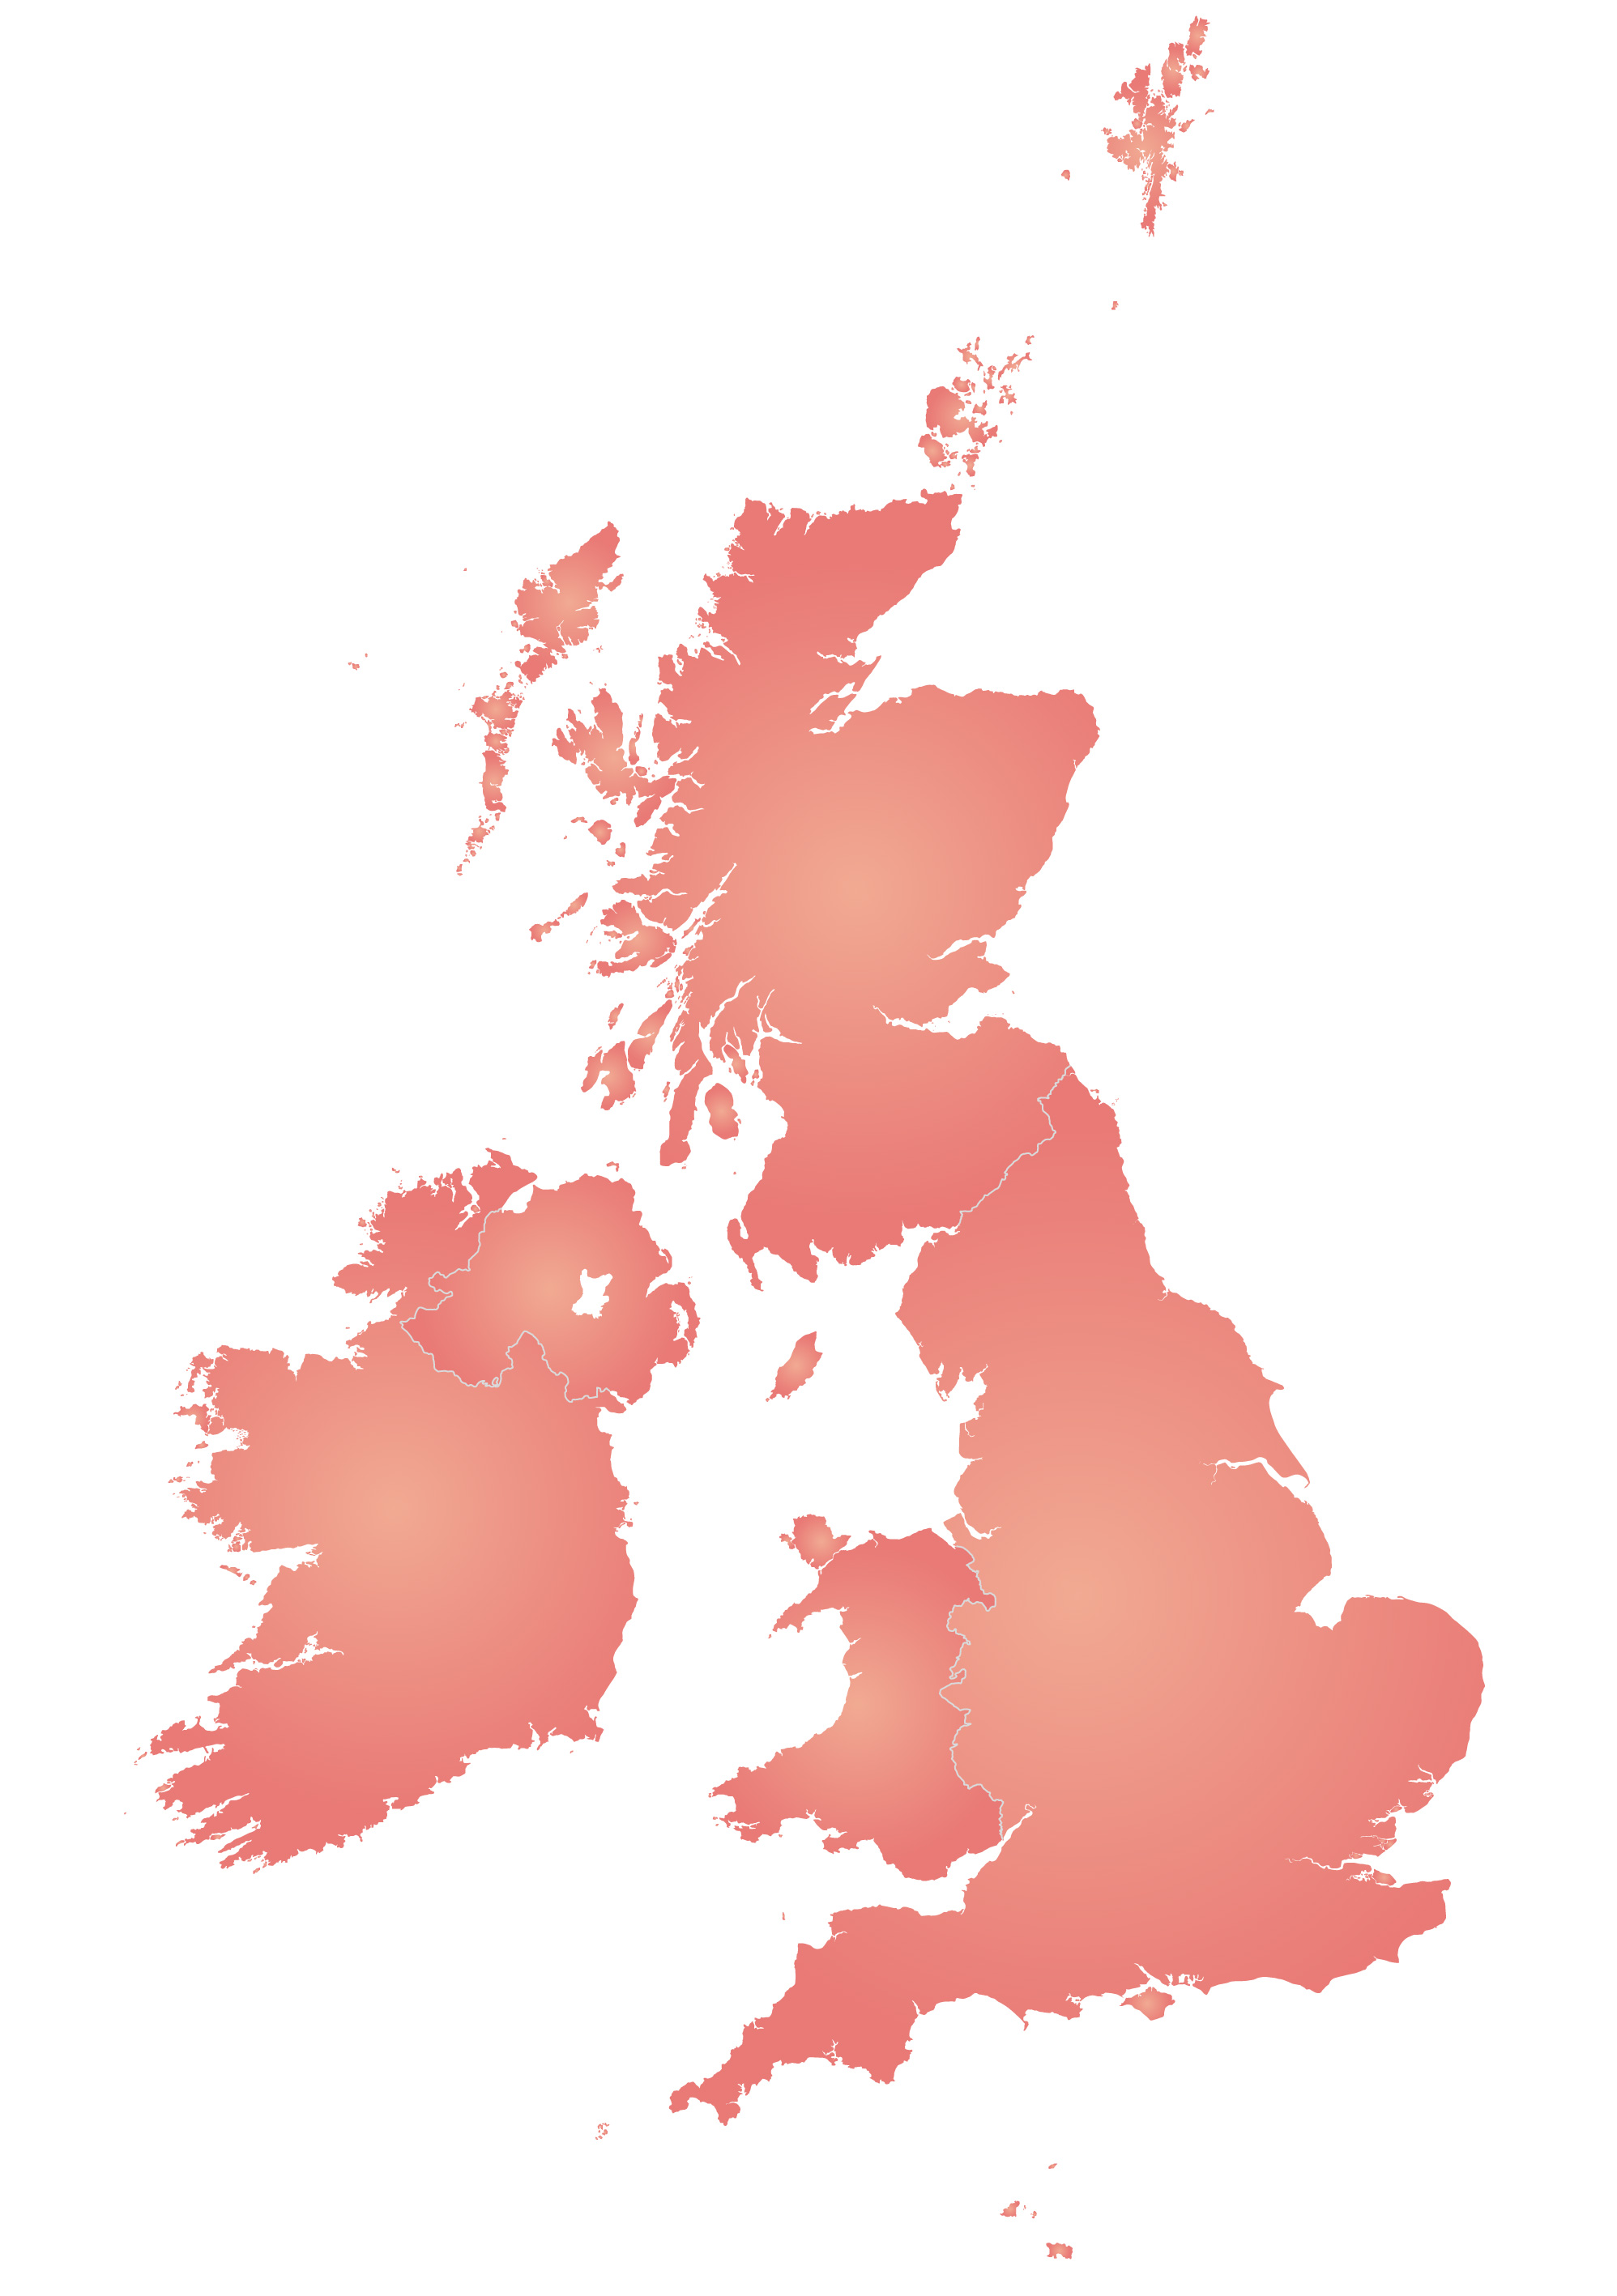 British Isles outline map – royalty free editable vector map - Maproom